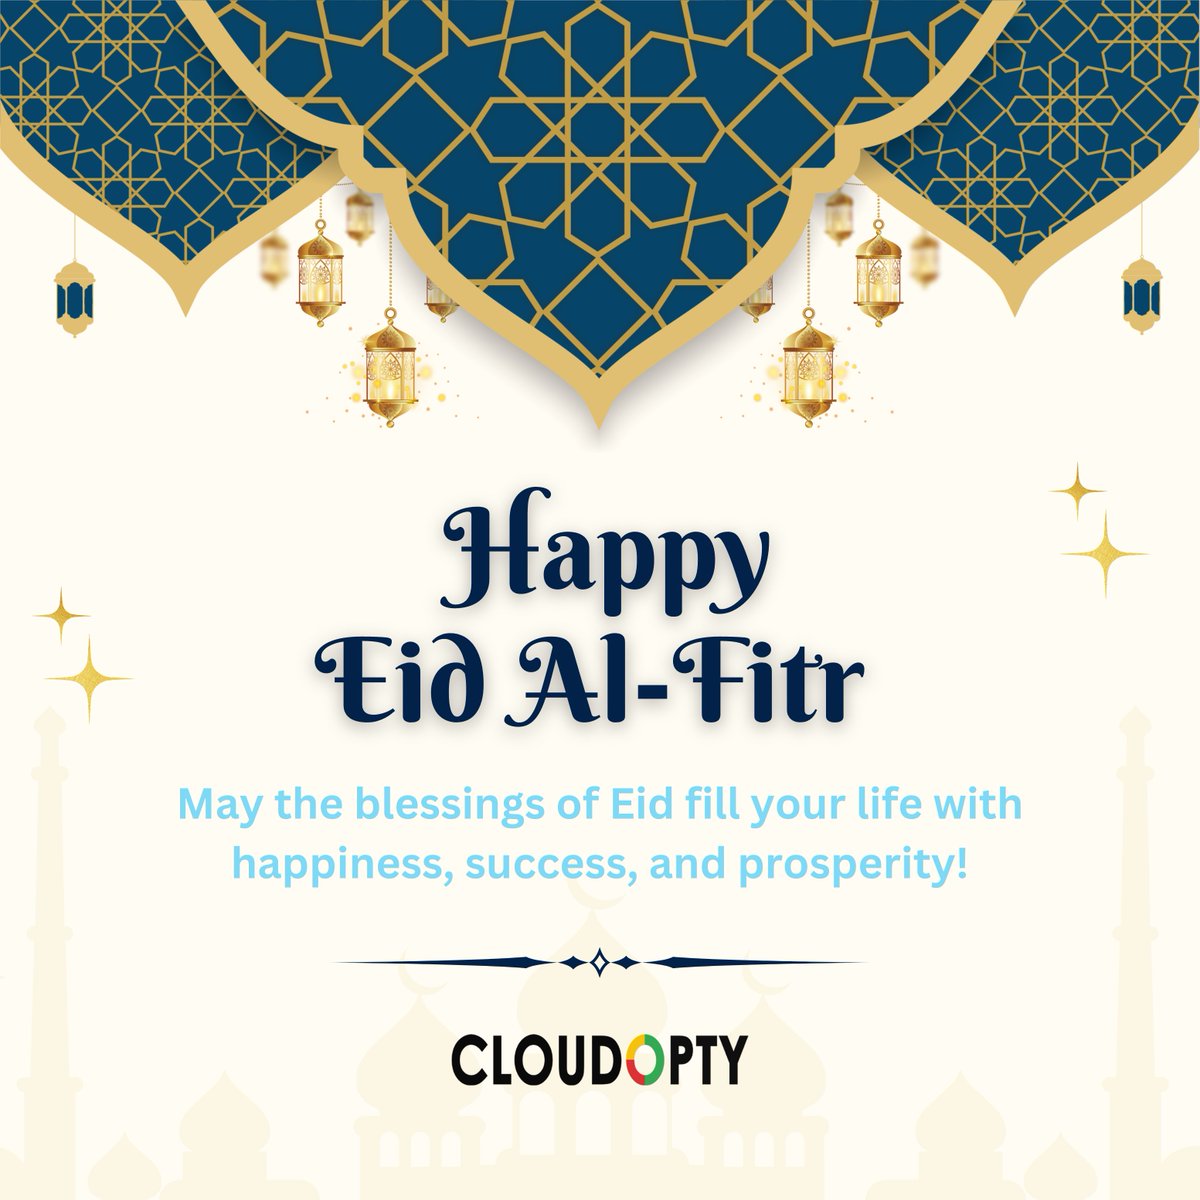 🌙May the joyous occasion of Eid al-Fitr fill your hearts with love, your homes with laughter, and your lives with prosperity. Eid Mubarak to all celebrating! ✨#EidAlFitr #EidMubarak #JoyfulCelebration #CloudOpty #cloudcomputing #cloudserviceprovider #compliance #cloudsecurity